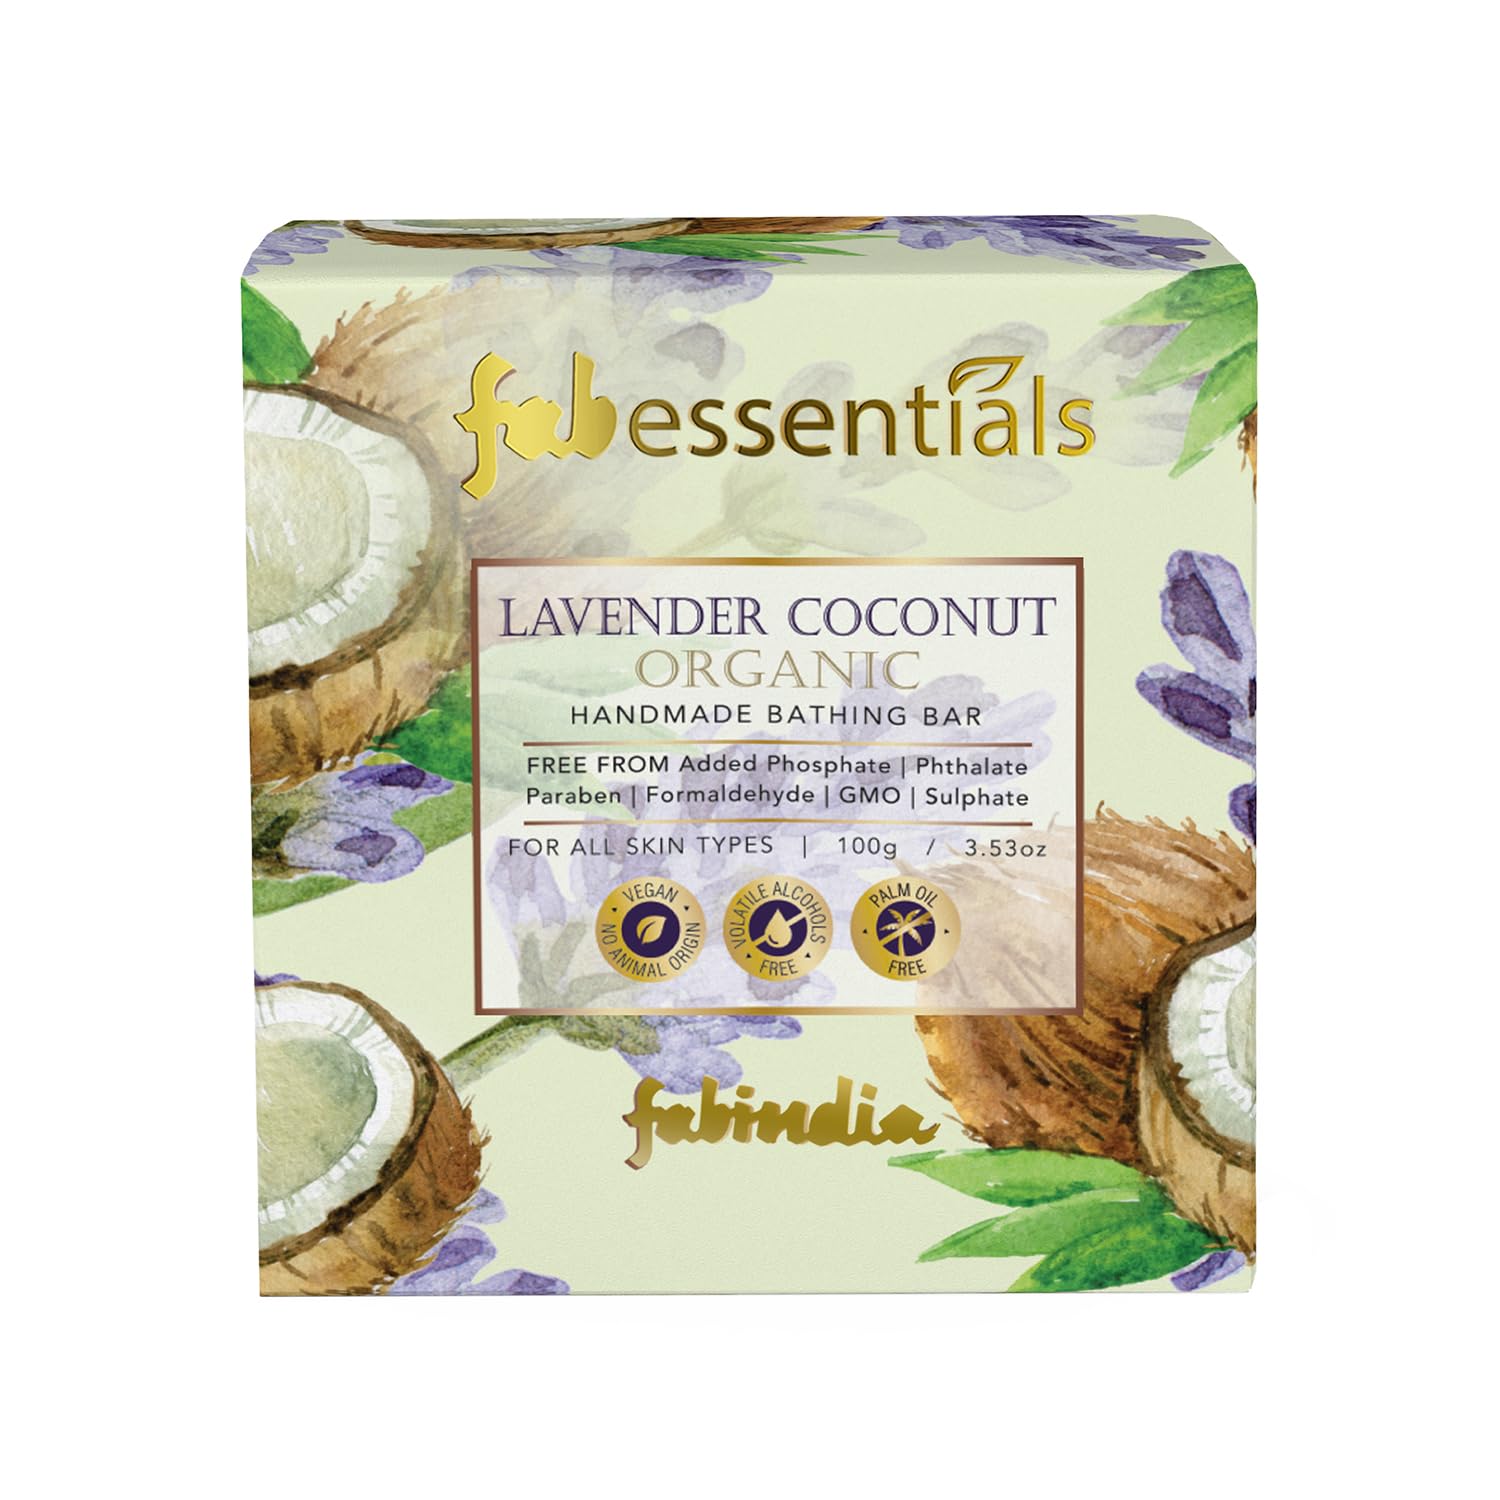 Fabessentials Lavender Coconut Organic Handmade Bathing Bar | 100% Organic | with the Goodness of Vitamin E| Cleanses, Nourishes & Brightens Skin | Vegan & Palm-Oil Free - 100 gm